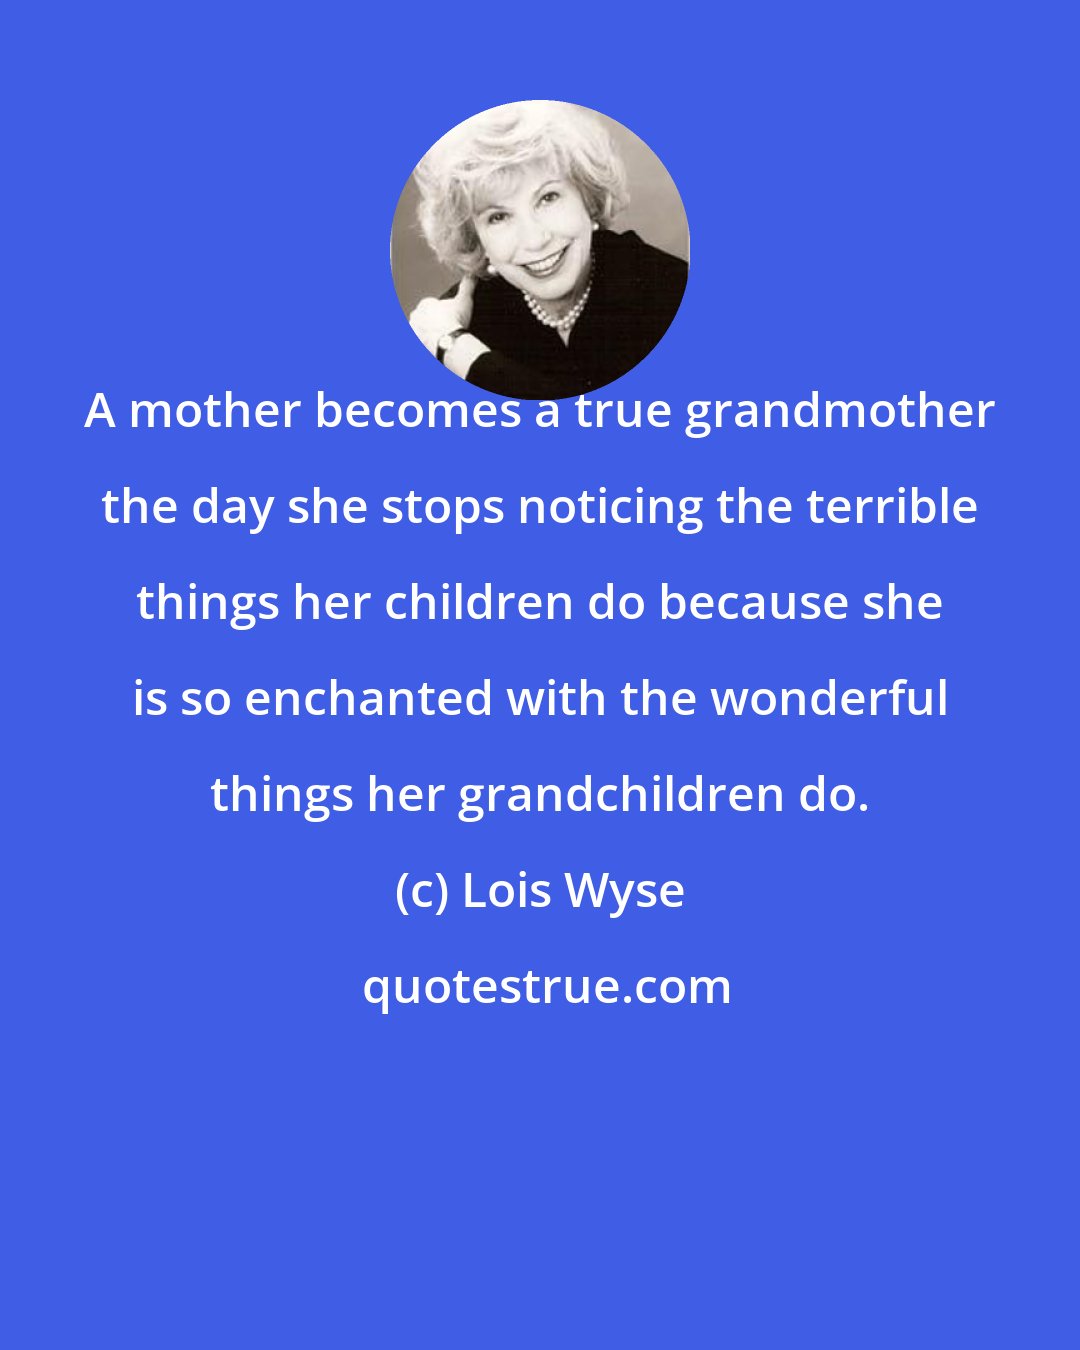 Lois Wyse: A mother becomes a true grandmother the day she stops noticing the terrible things her children do because she is so enchanted with the wonderful things her grandchildren do.